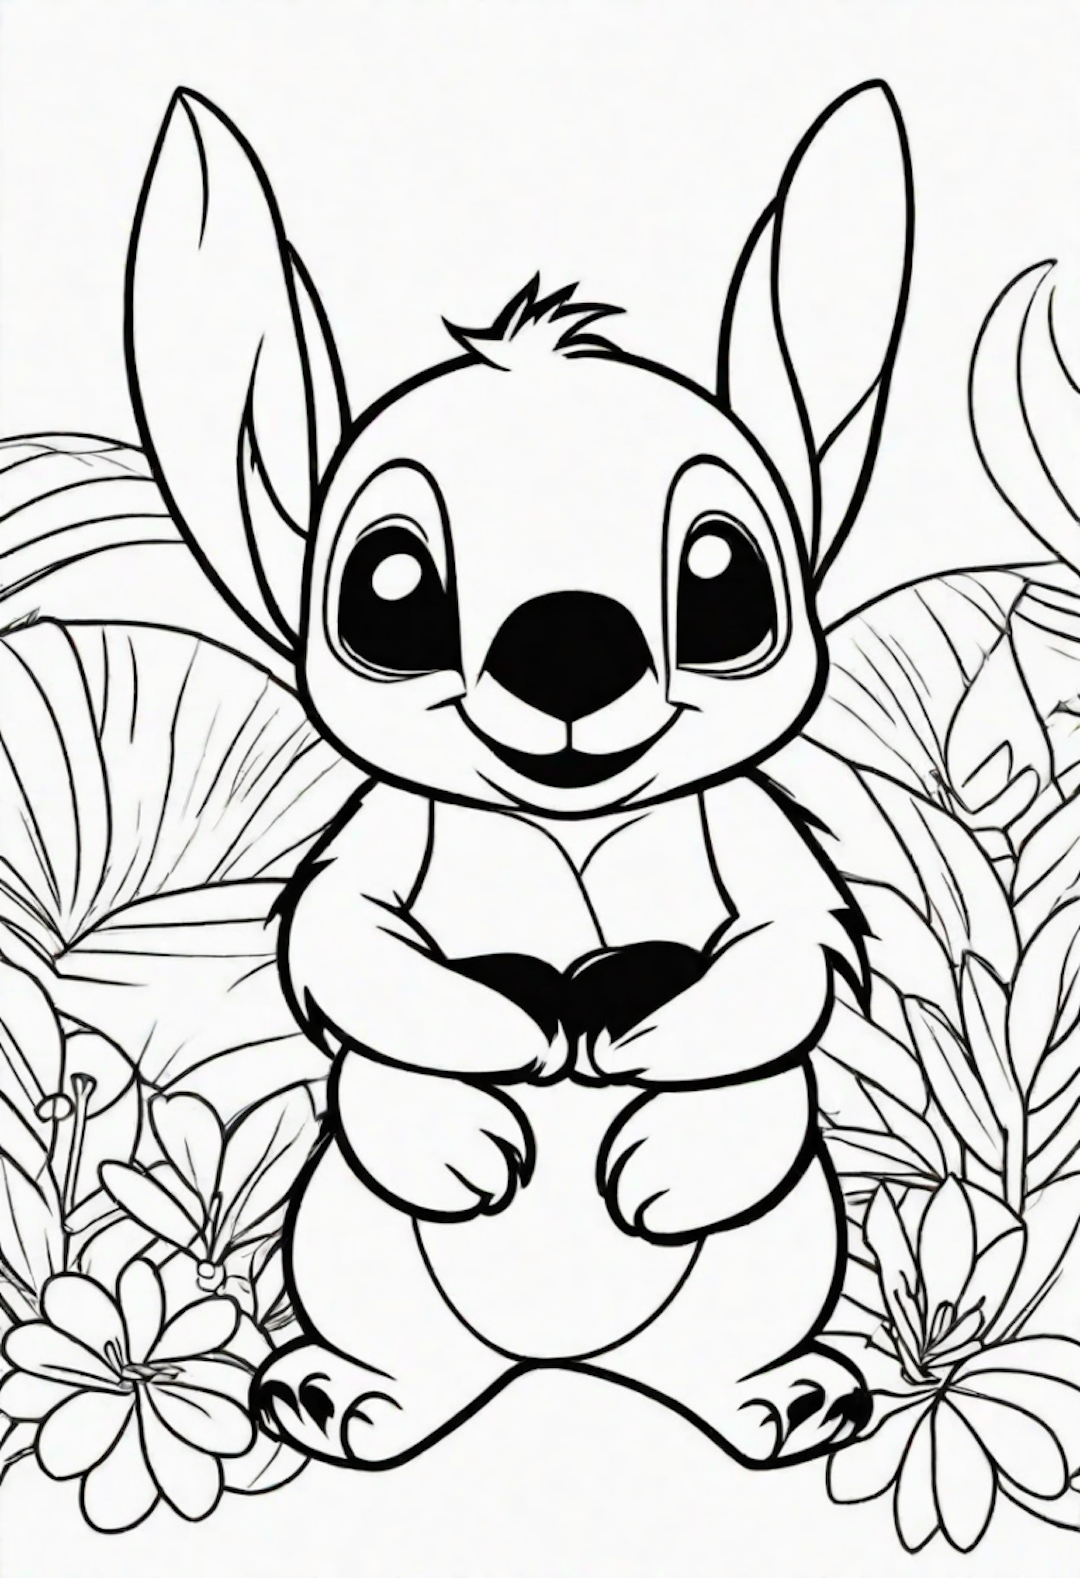 Stitch in the Garden Coloring Fun coloring pages